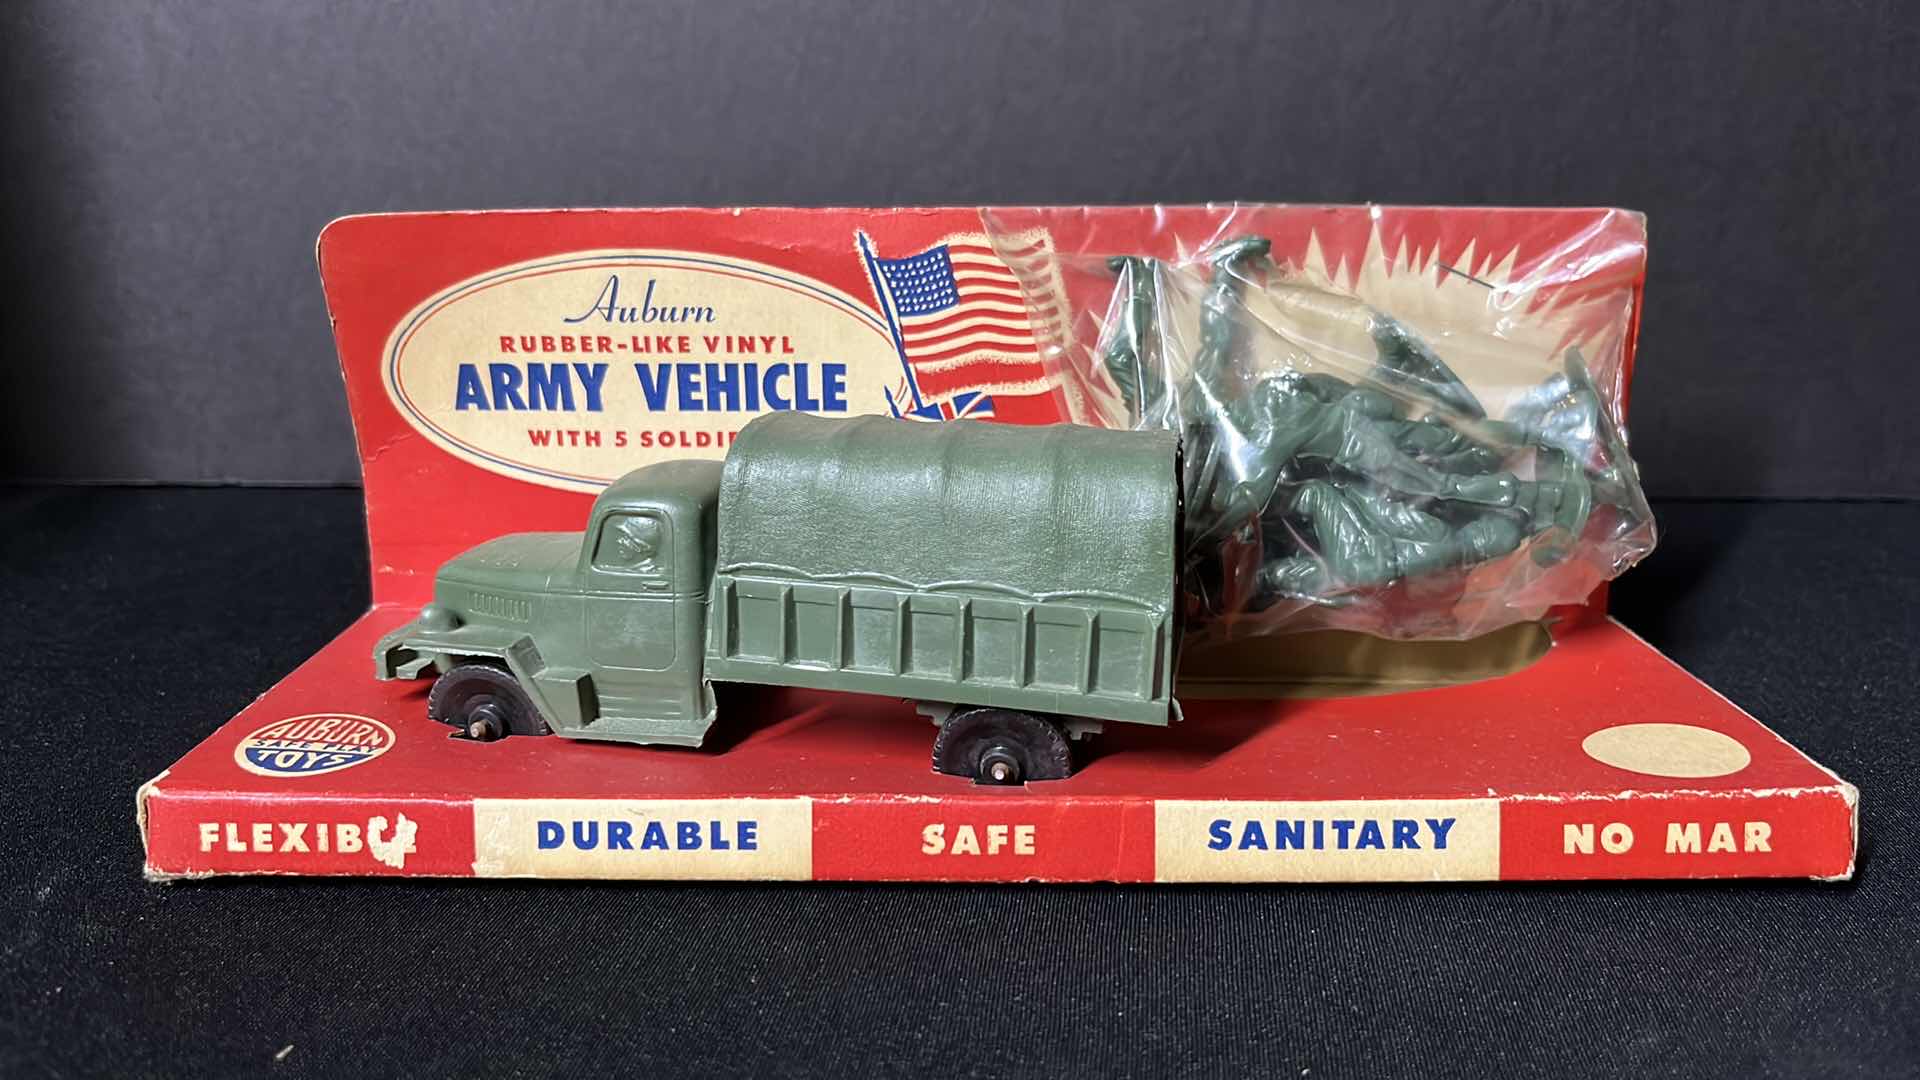 Photo 1 of AUBURN TOYS RUBBER-LIKE VINYL ARMY VEHICLE W SOLDIERS (No. 319 ARMY TRUCK W 5 SOLDIERS)